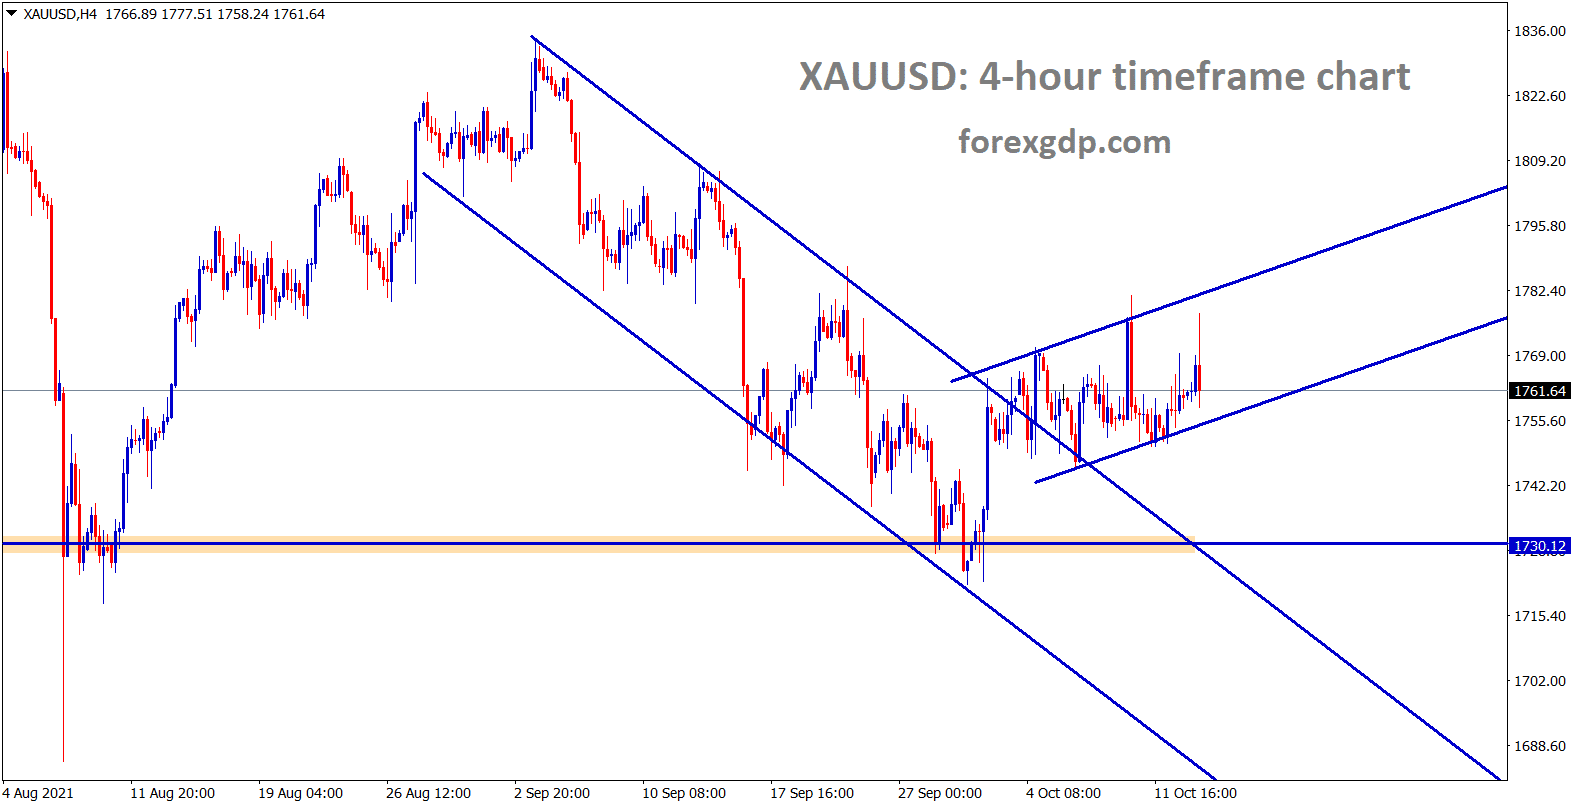 Gold XAUUSD price is still consolidating between the minor ascending channel range wait for the breakout